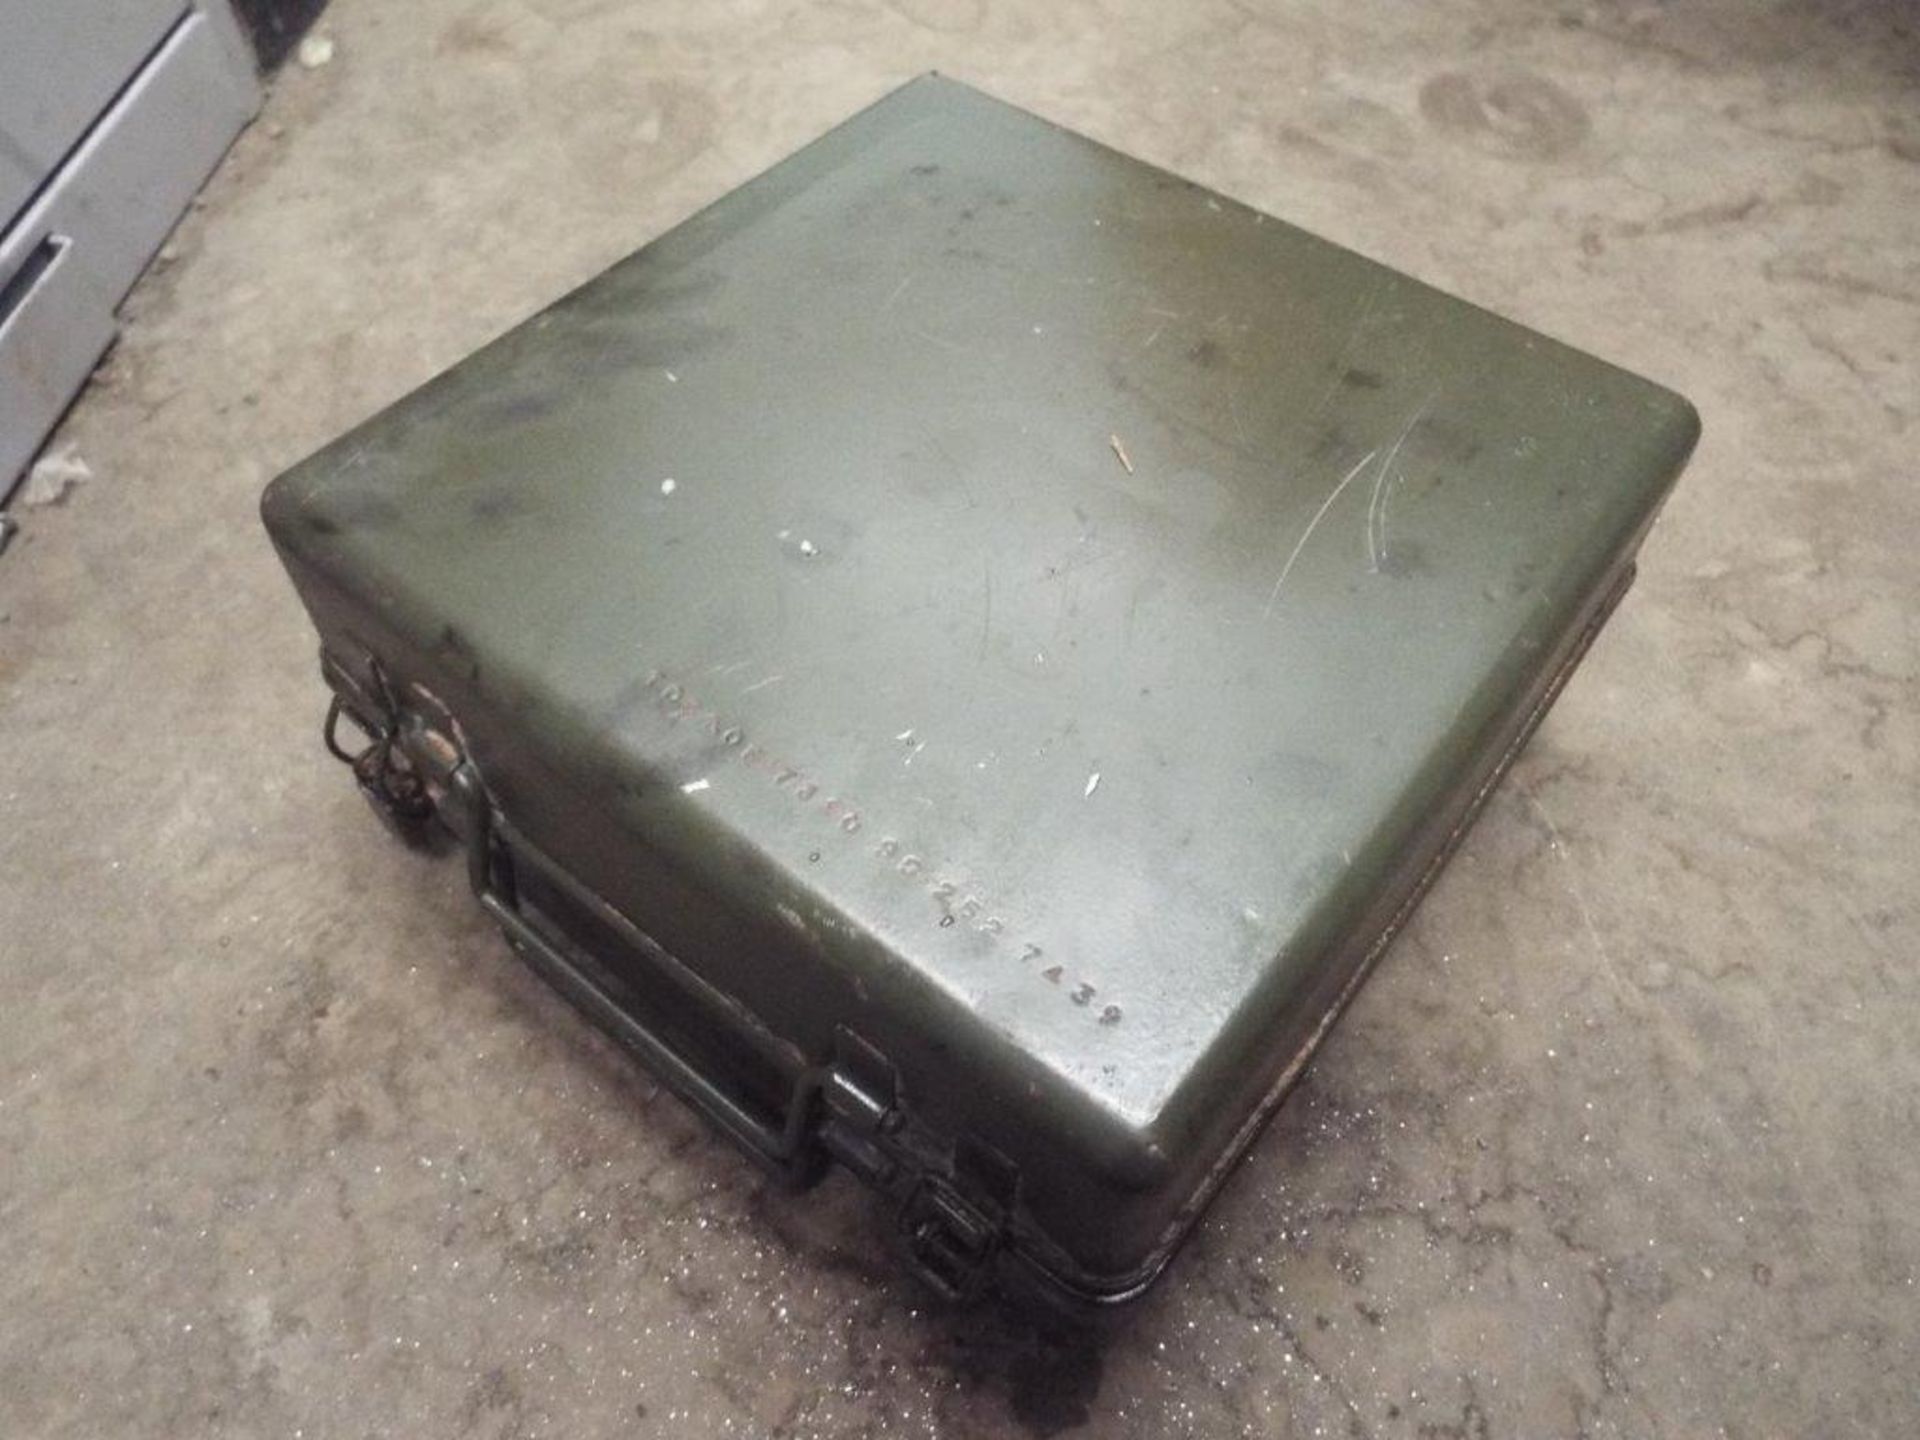 No. 12 Stove, Diesel Cooker/Camping Stove - Image 5 of 6